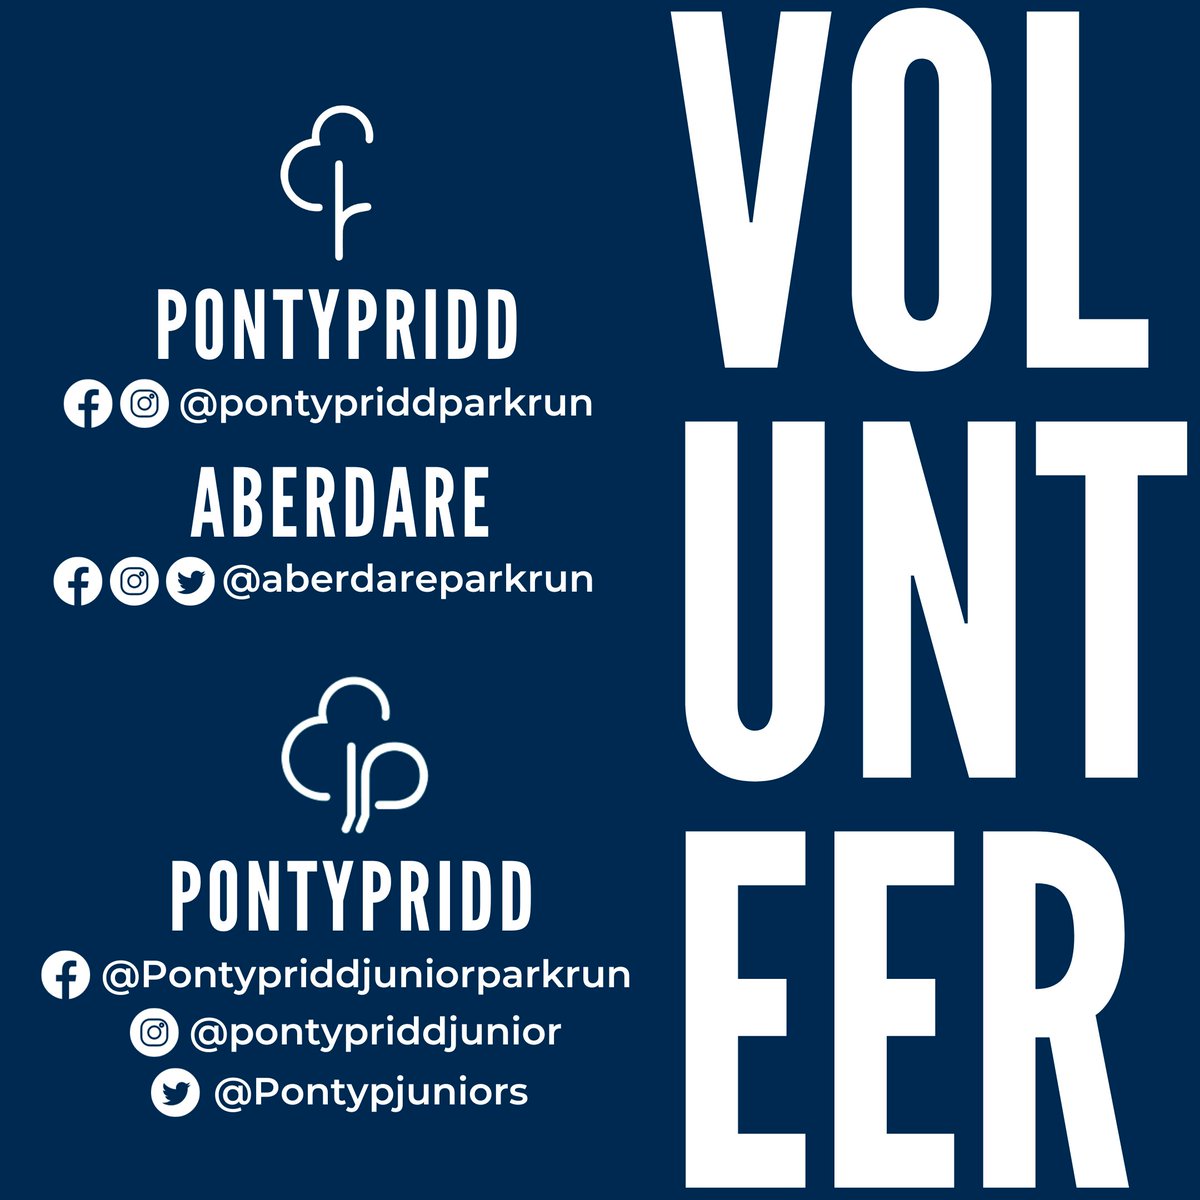 Are you looking to volunteer in your community? parkrun is 100% reliant on volunteers.. Aberdare & Pontypridd - every Saturday morning Pontypridd junior - every Sunday morning Contact them for details: @Aberdareparkrun / @Pontypjuniors